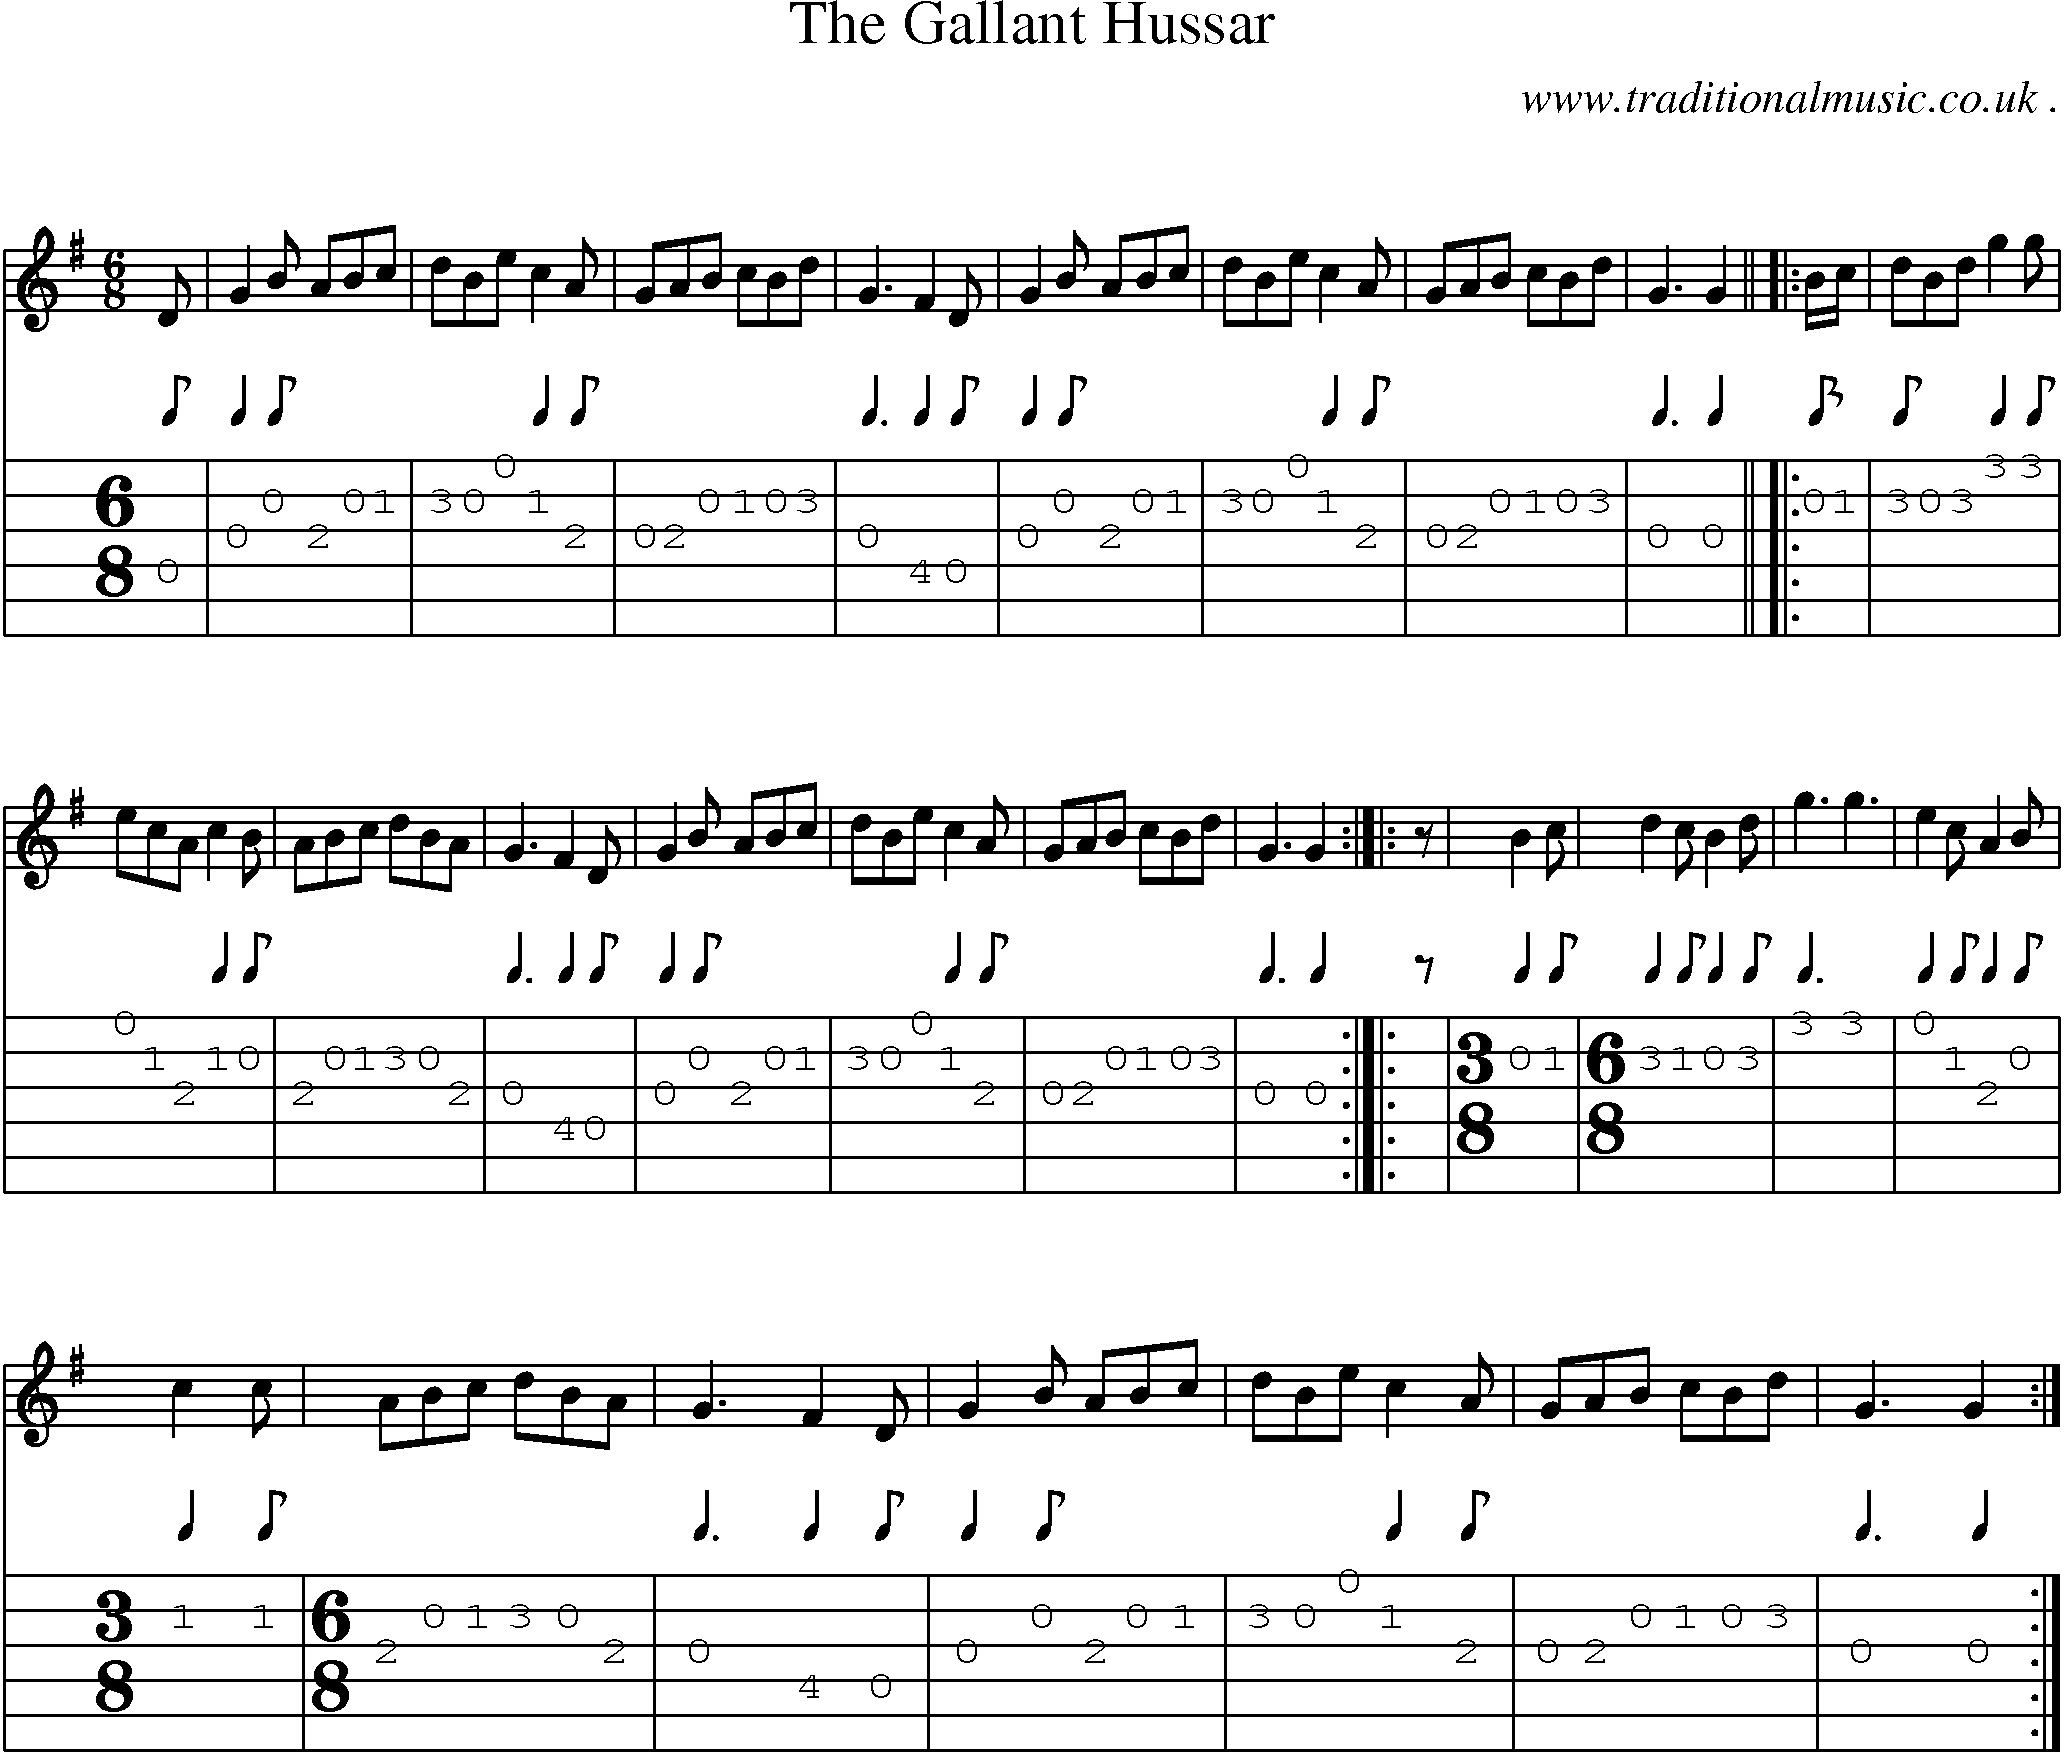 Sheet-Music and Guitar Tabs for The Gallant Hussar